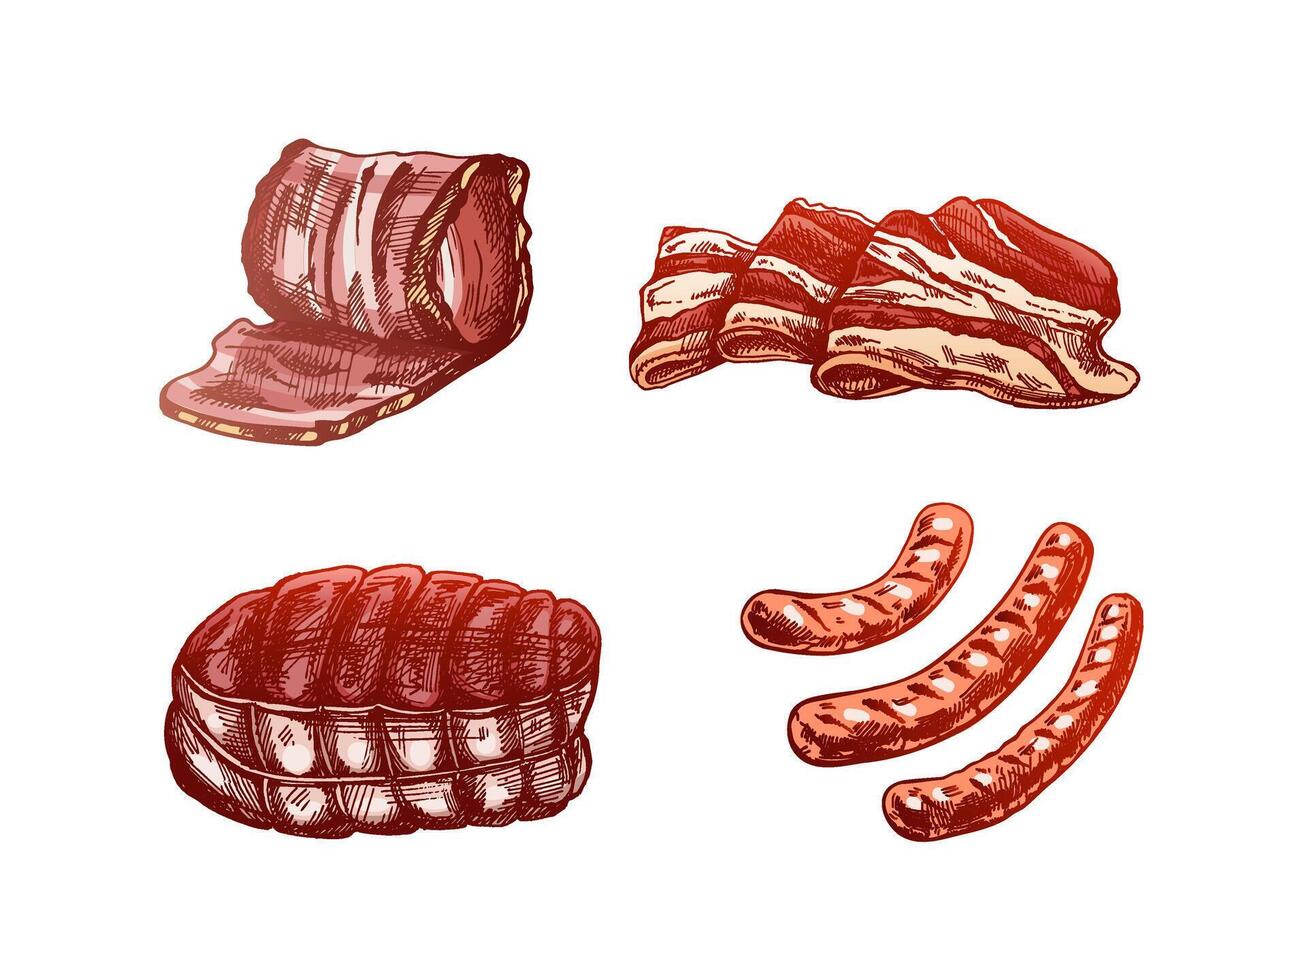 A set of hand-drawn colored sketches of meat pieces, bacon, ham, pork, sausage. Fresh meat products. For design of menu for restaurants, butcher shop. Vintage engraved illustration. vector